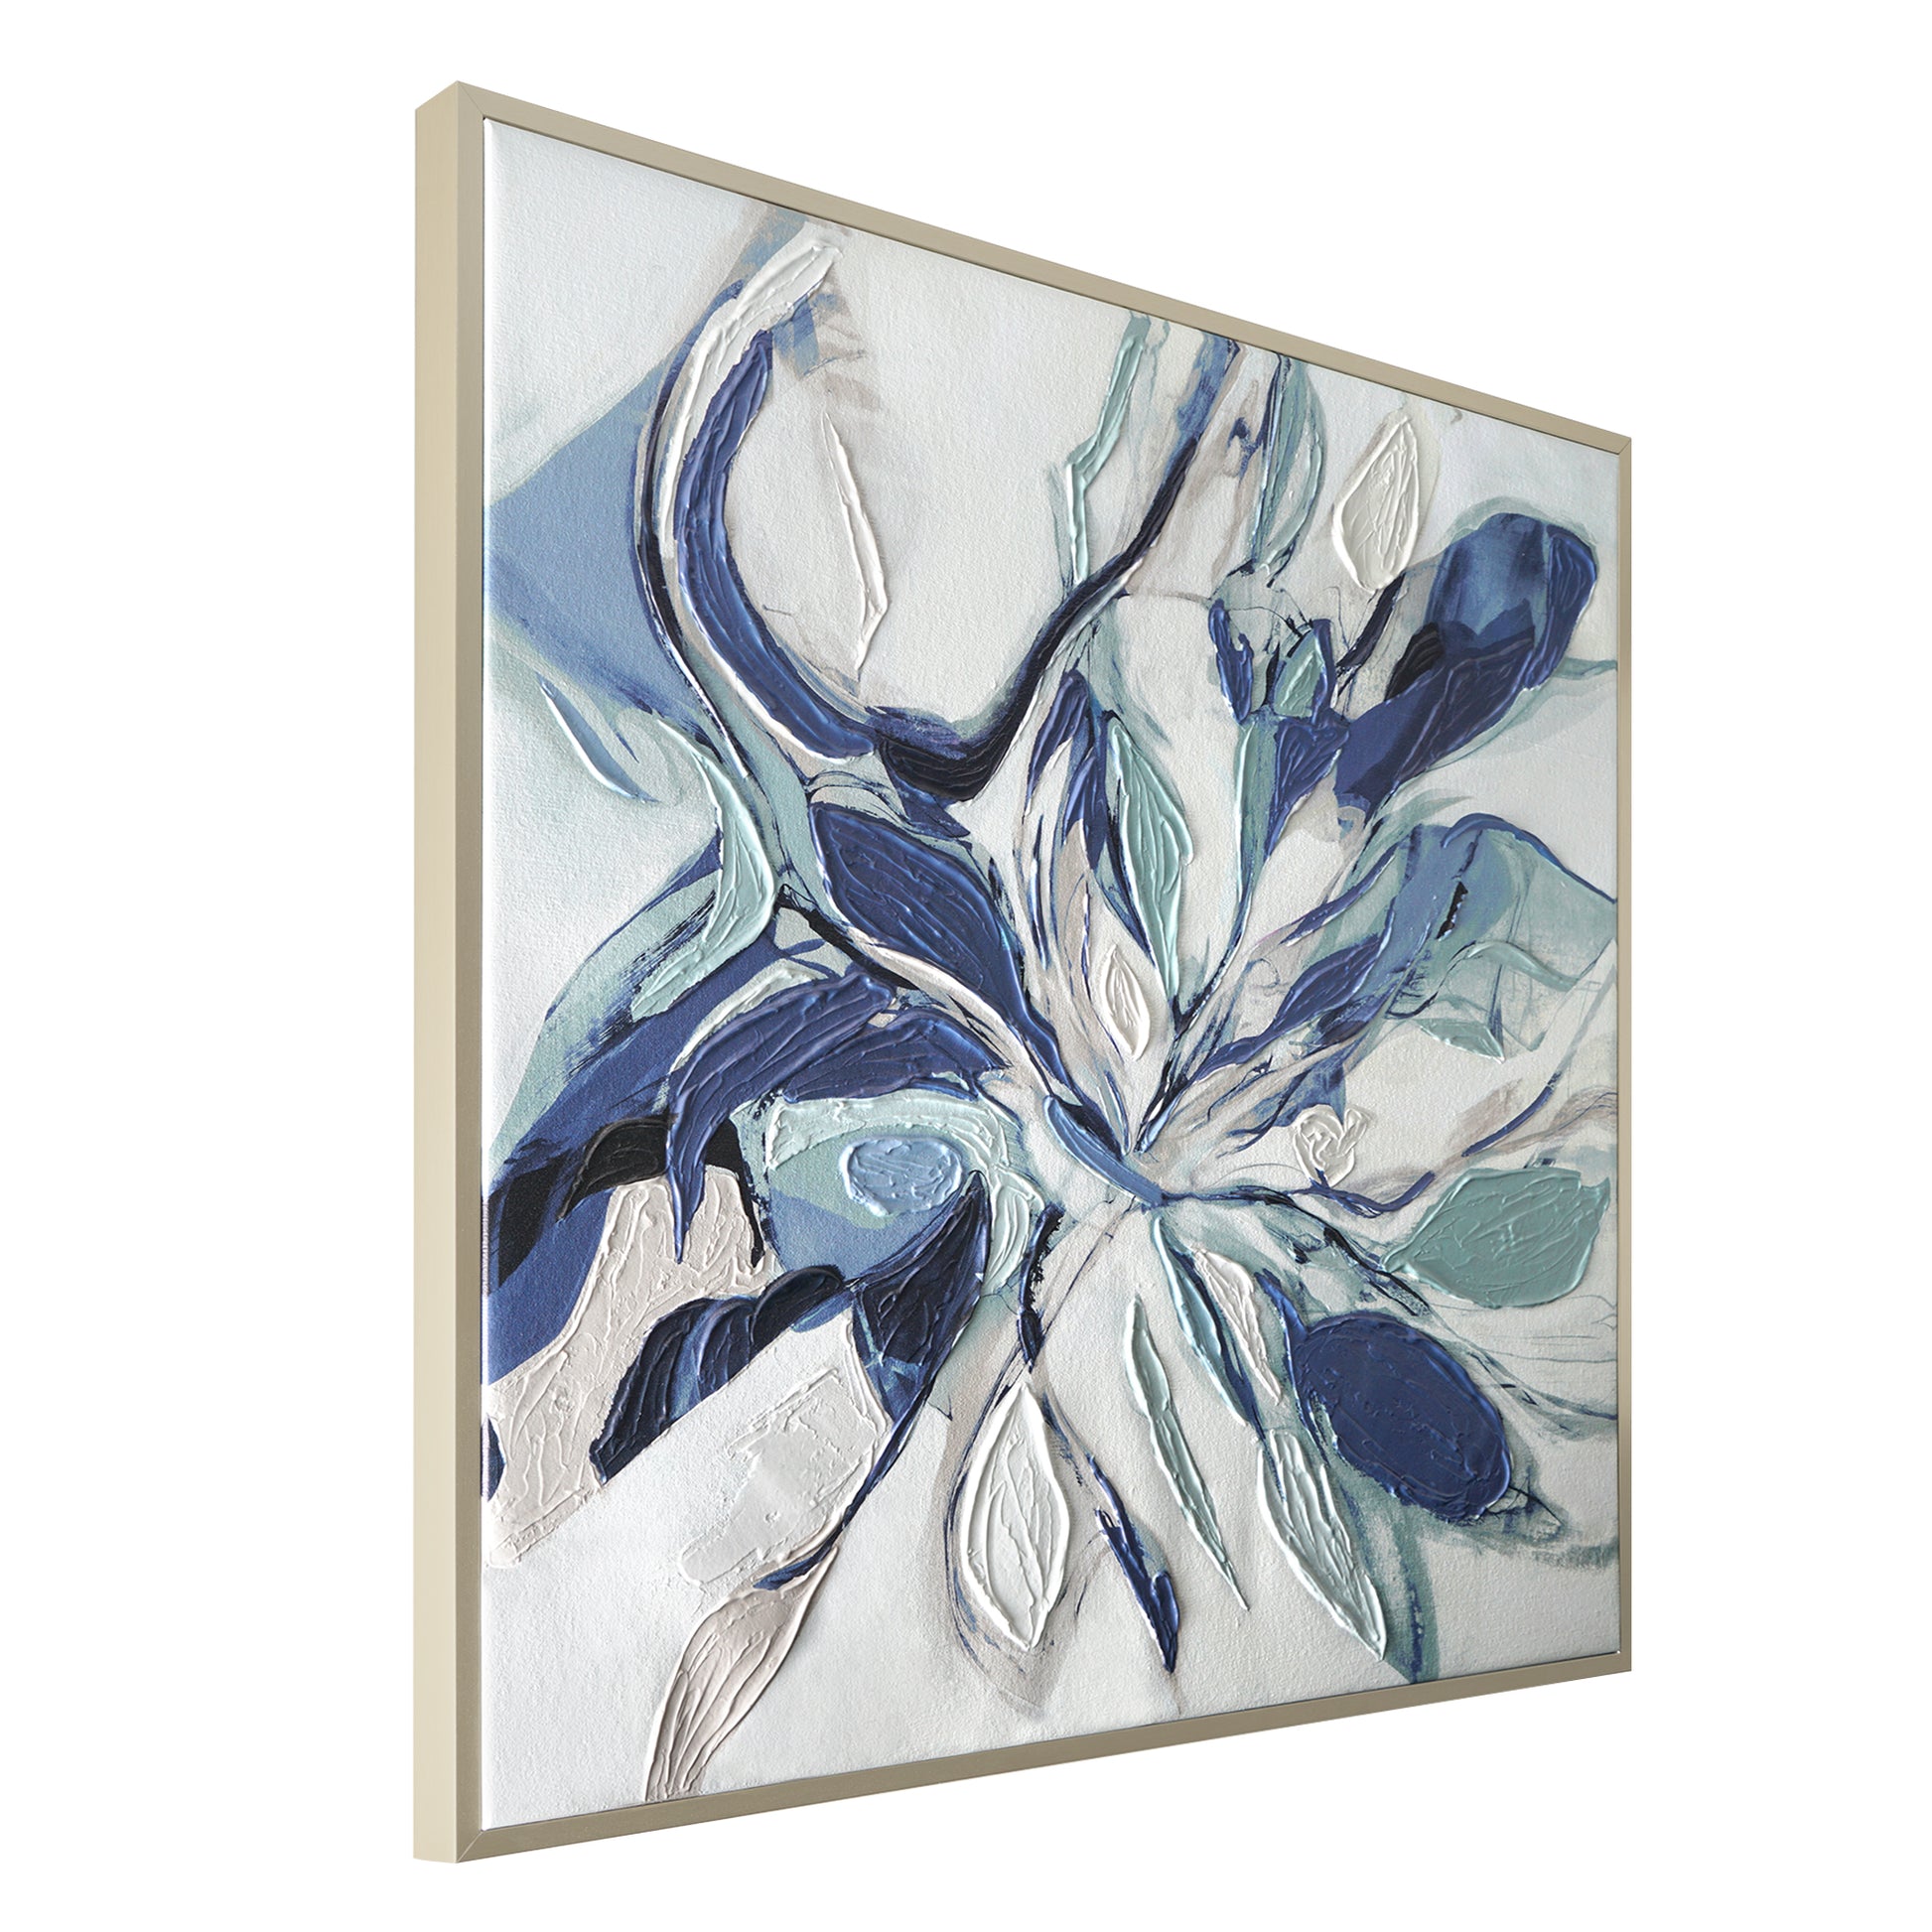 ArtFX - Abstracted Floral